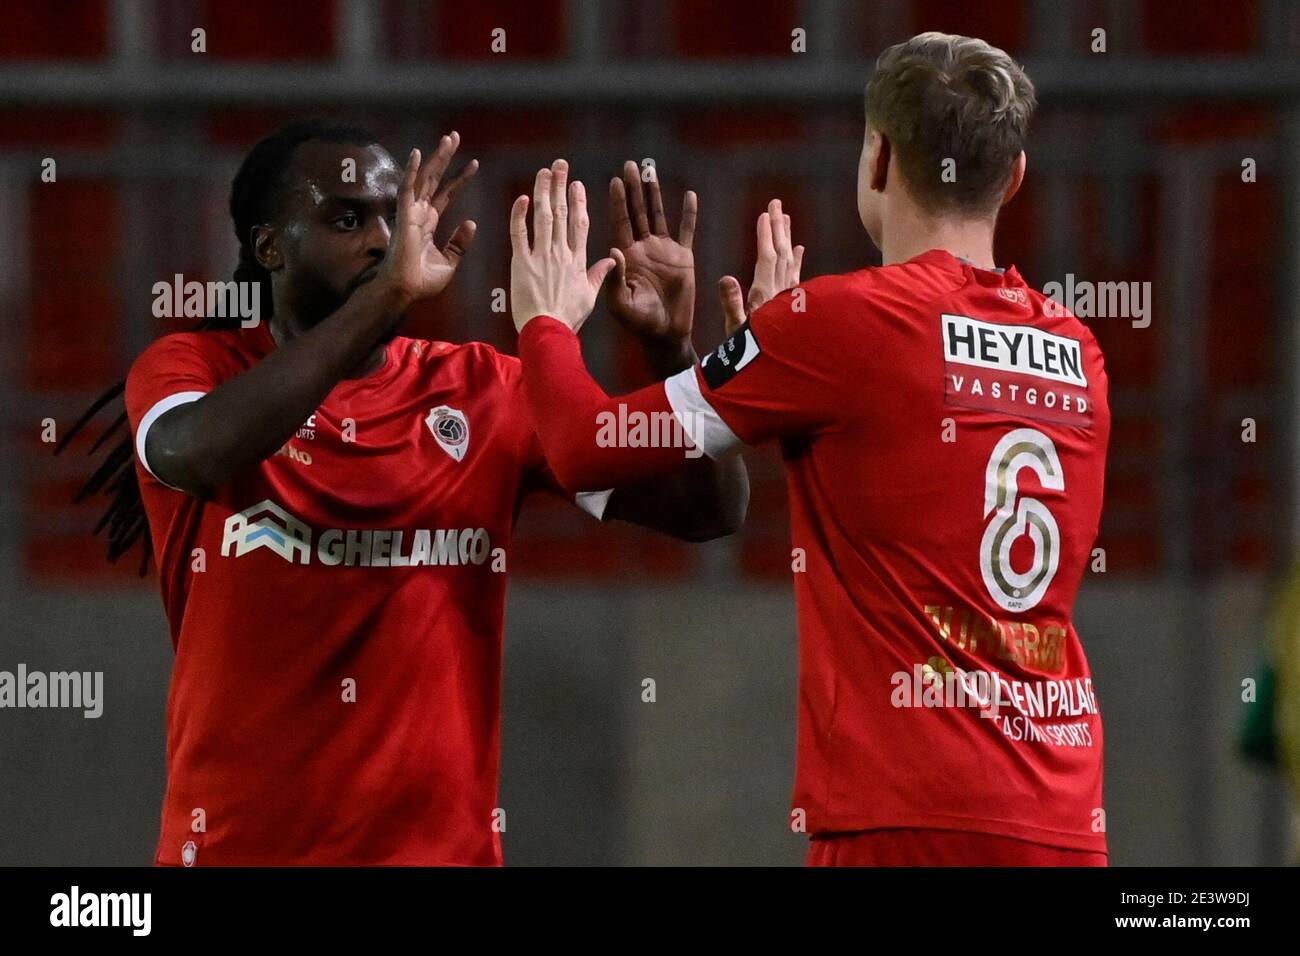 Antwerp's Jordan Lukaku and Antwerp's Simen Juklerod pictured during a  soccer match between Royal Antwerp FC and Cercle Brugge, Wednesday 20  January 2 Stock Photo - Alamy